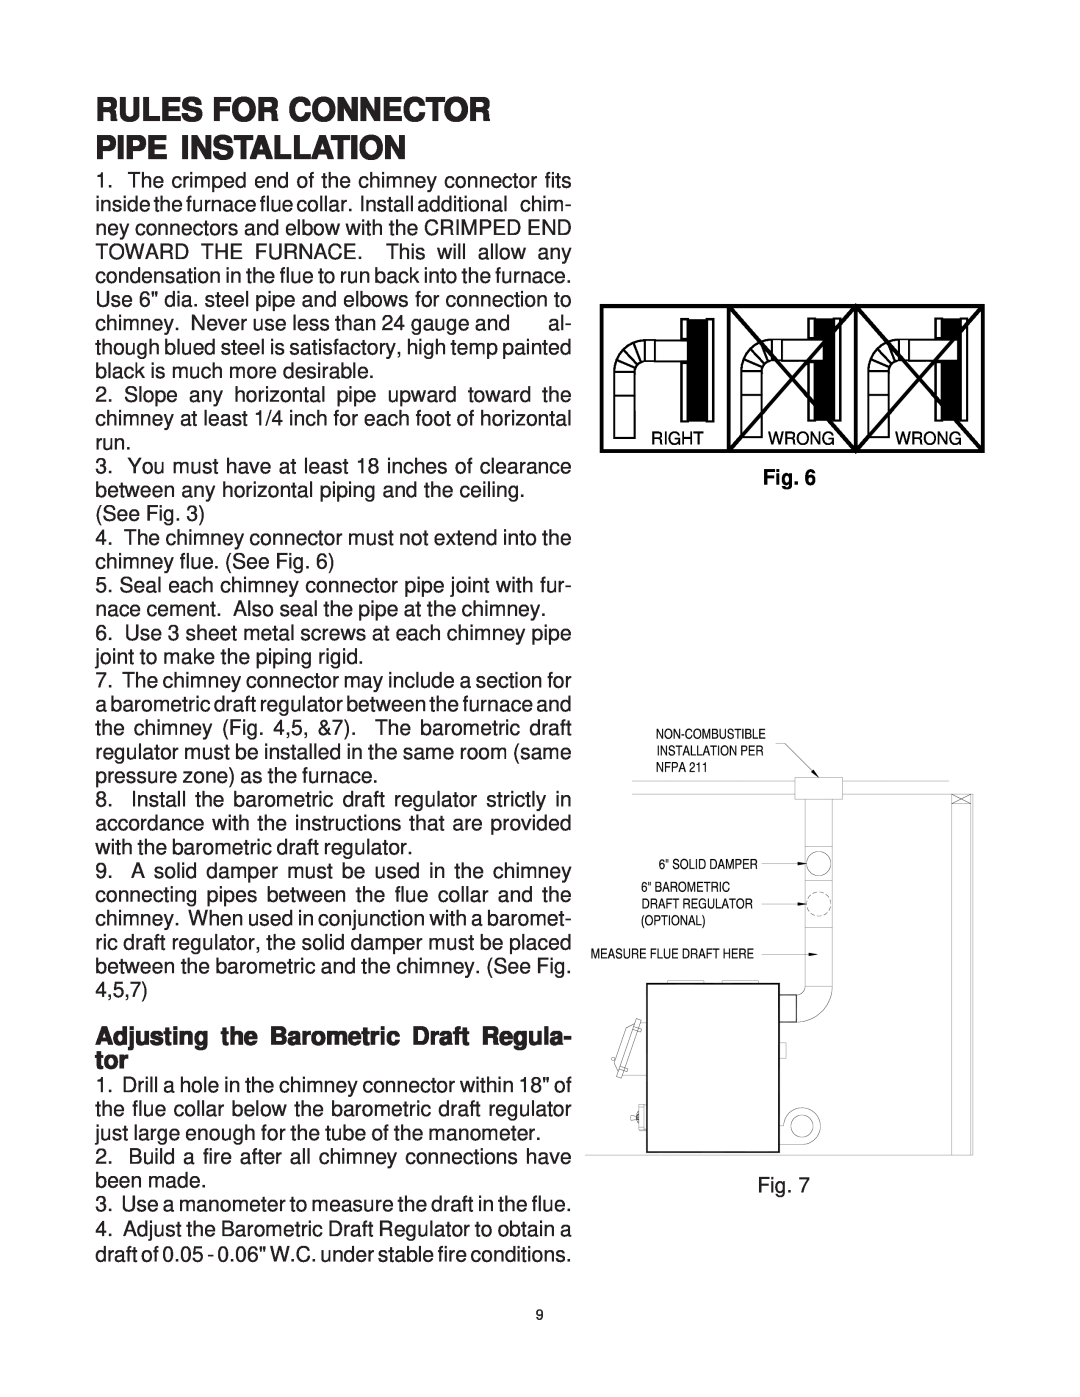 United States Stove 1537M owner manual Rules For Connector Pipe Installation, Adjusting the Barometric Draft Regula- tor 